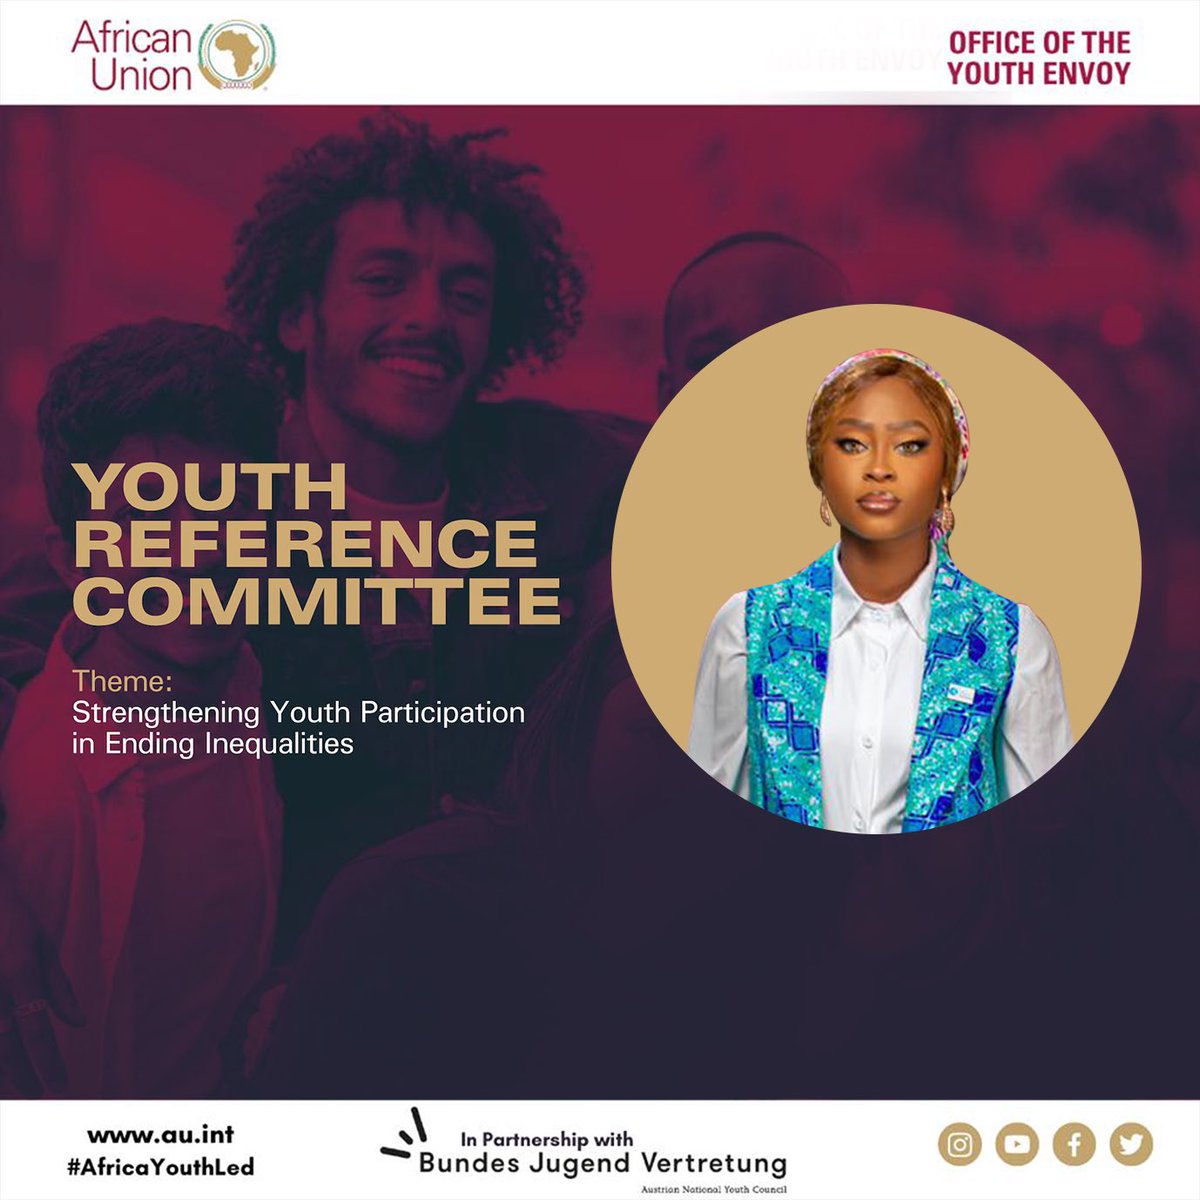 I am excited to announce that I have been selected to join the Youth Reference Committee! I look forward to engaging with young people on Youth Civic Engagement and Advocacy and @AU_YouthEnvoy.

#AfricaYouthLed #AUYRC2023 #SDGs4Agenda2063 #Partnerships4Change